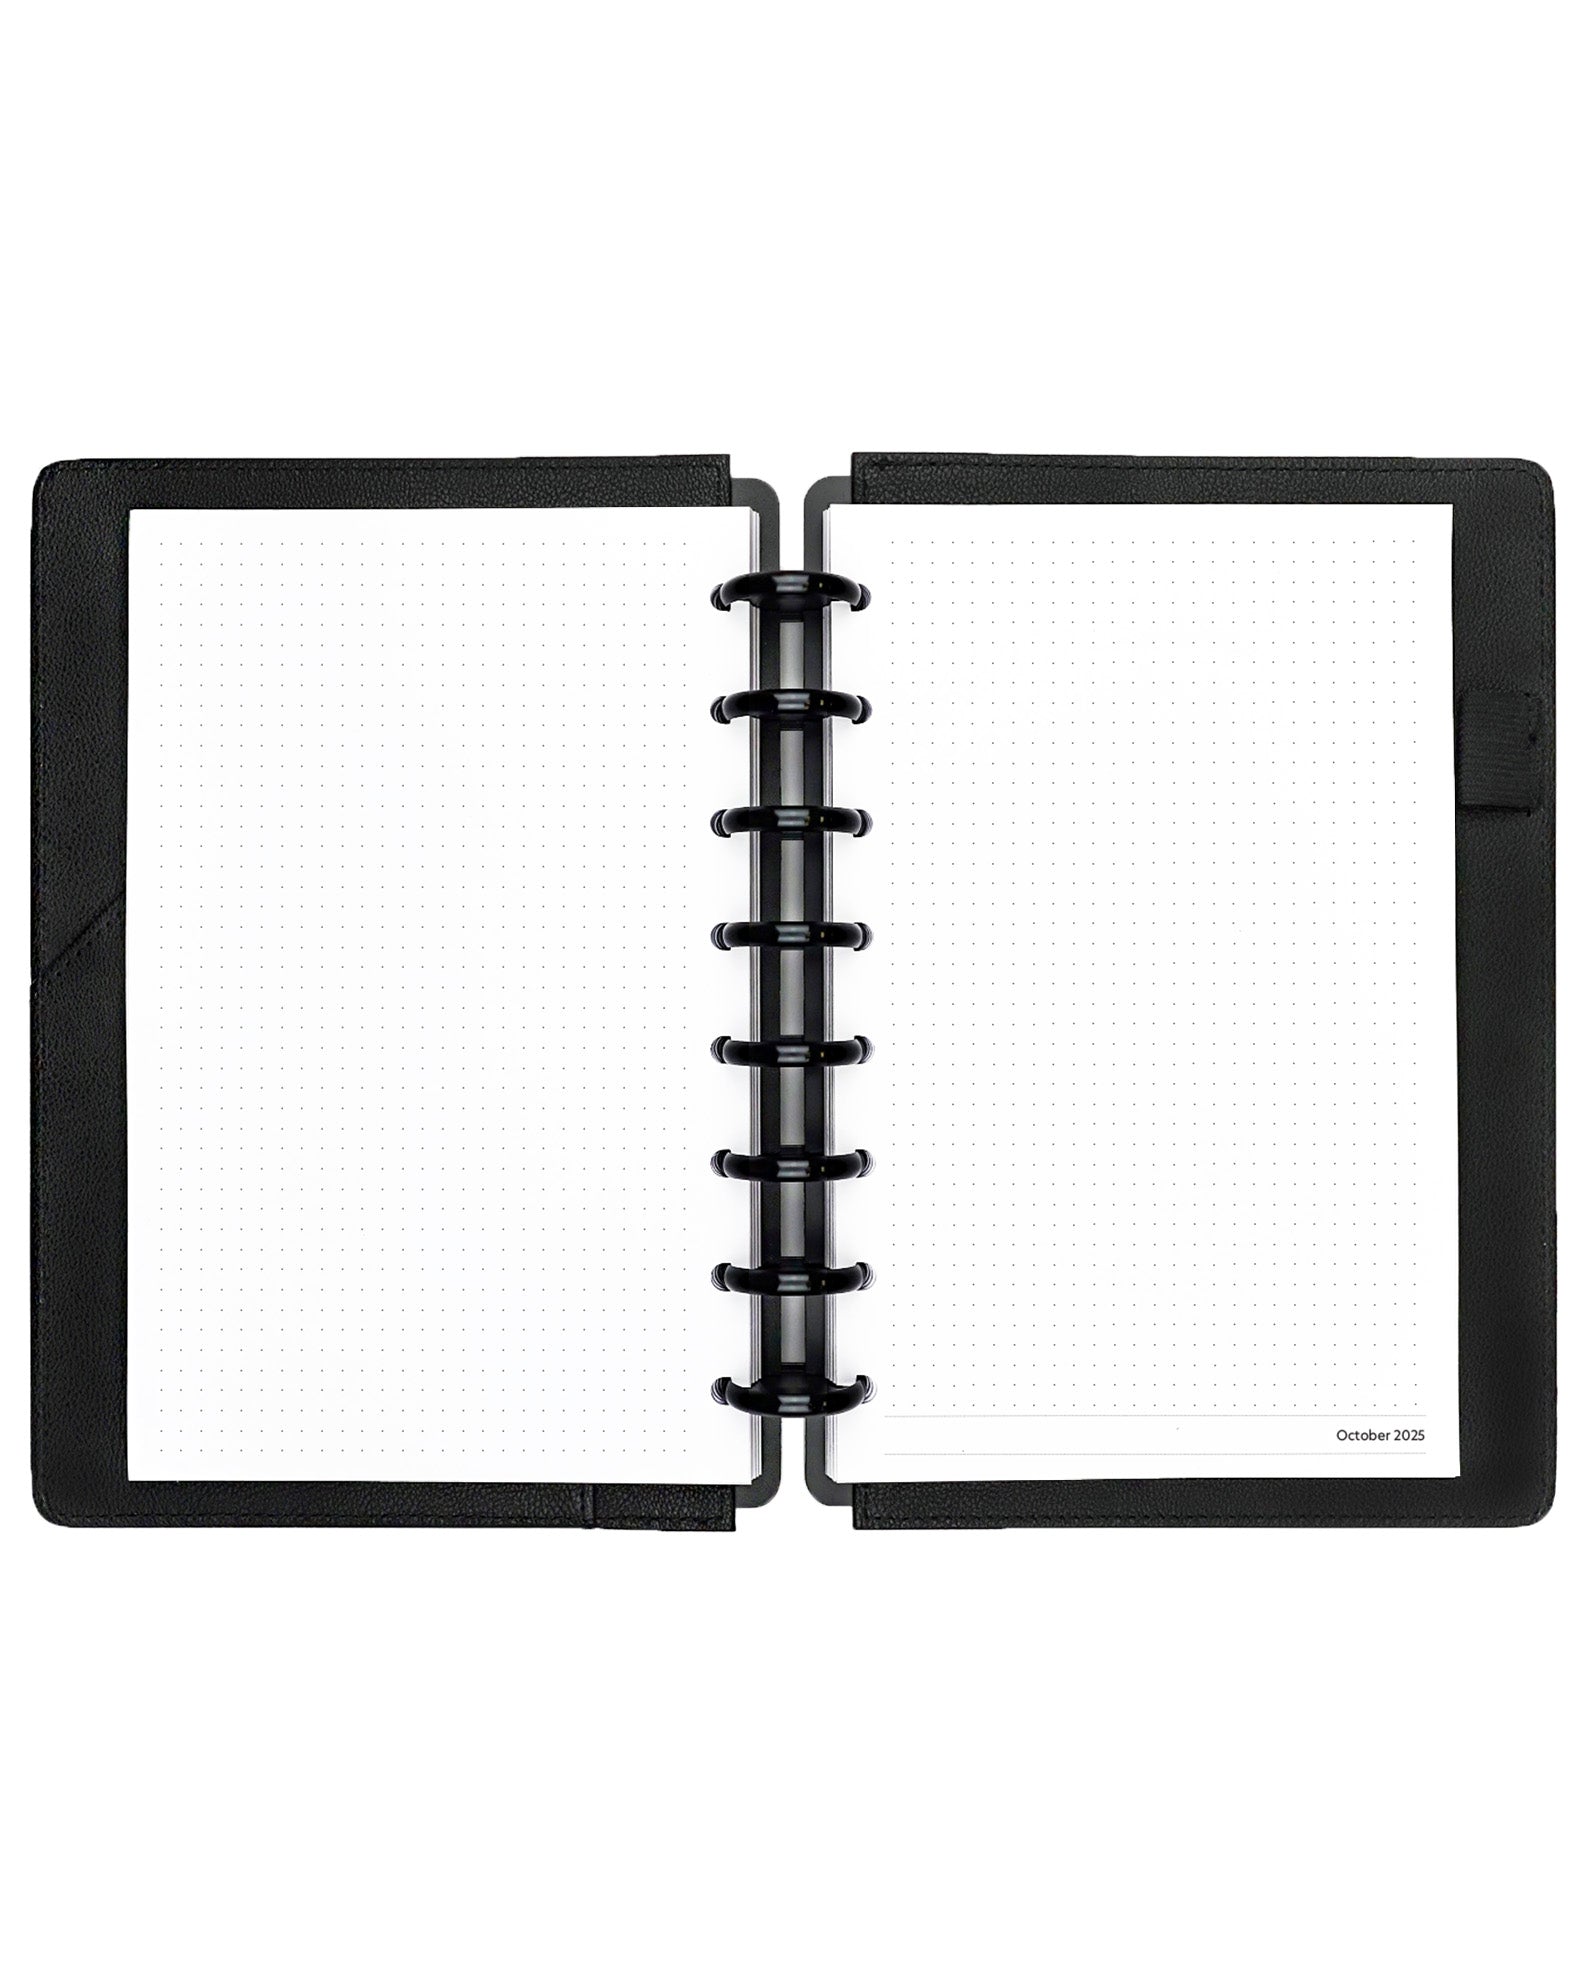 Daily planner insert refill pages for discbound and six ring planner systems by Jane's agenda.